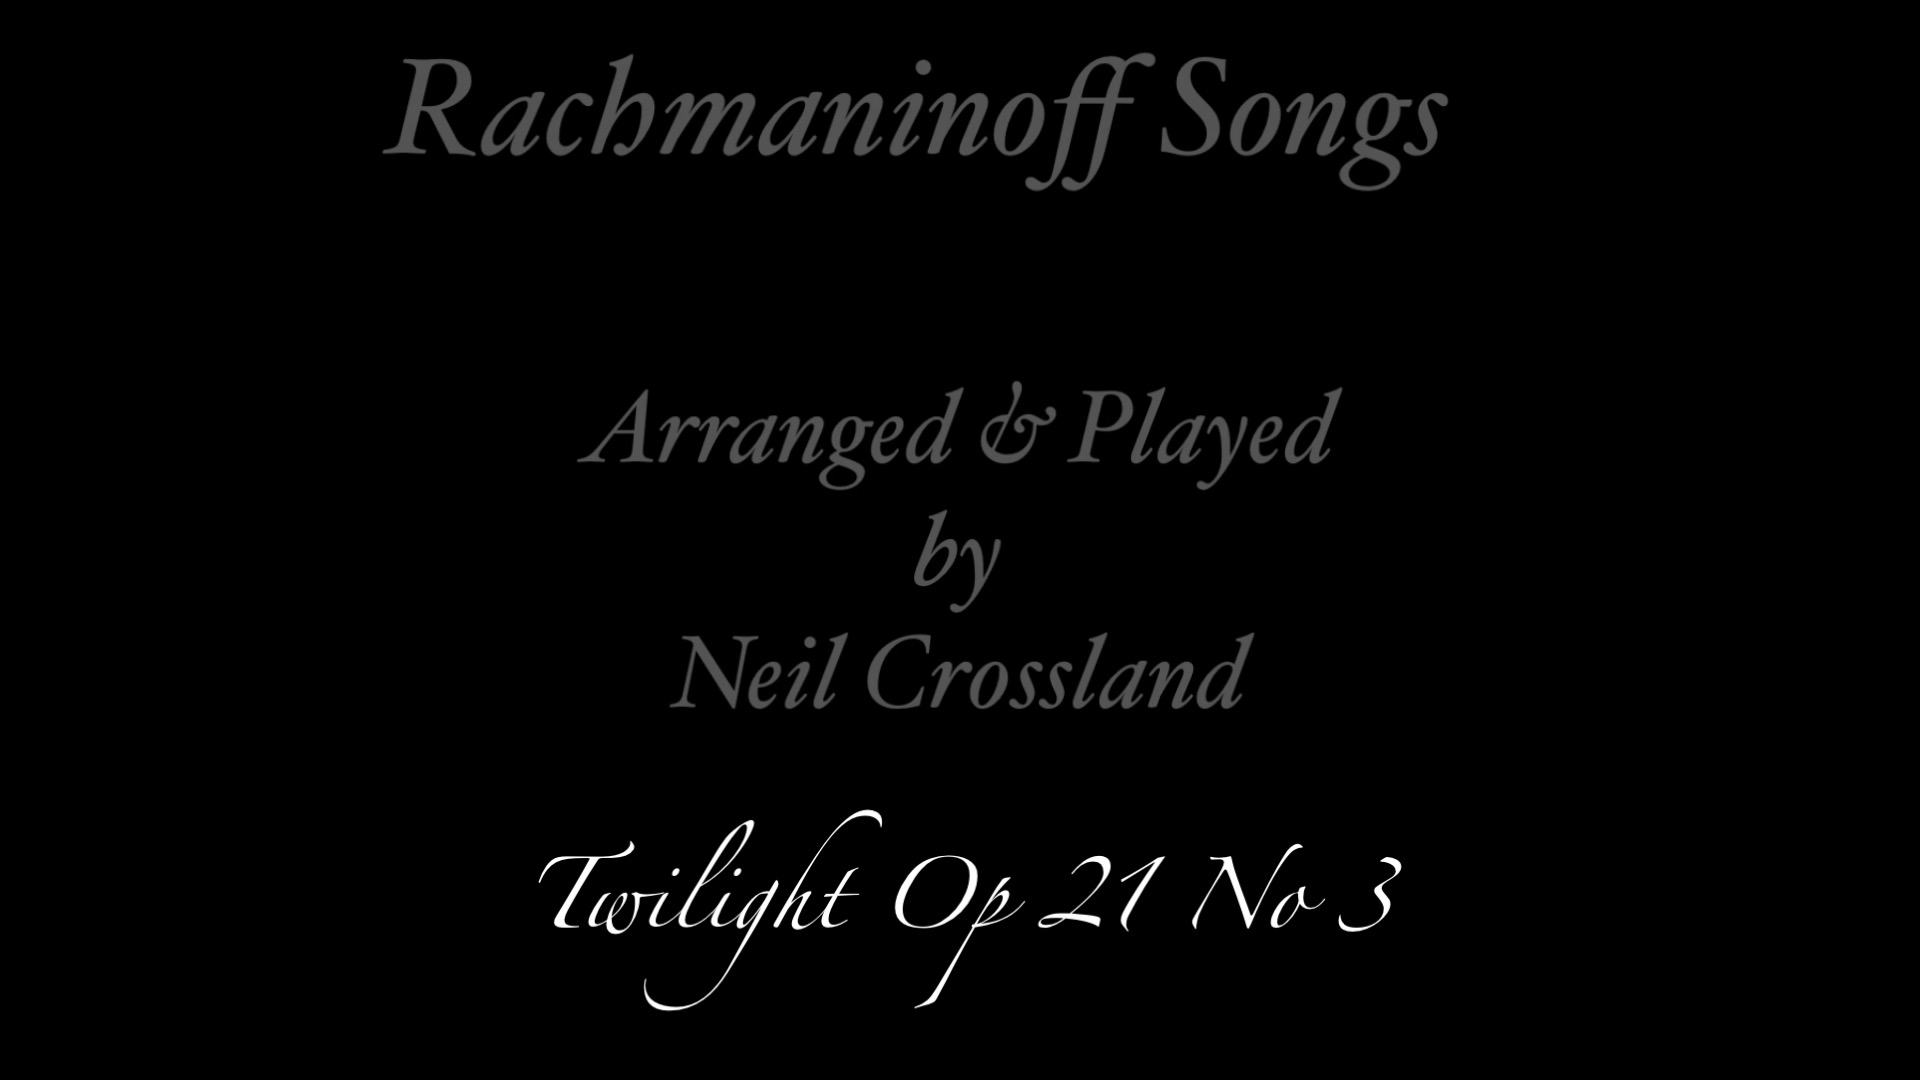 Rachmaninoff Song Twilight Op 21 No 3 - Arranged and Performed by Neil Crossland